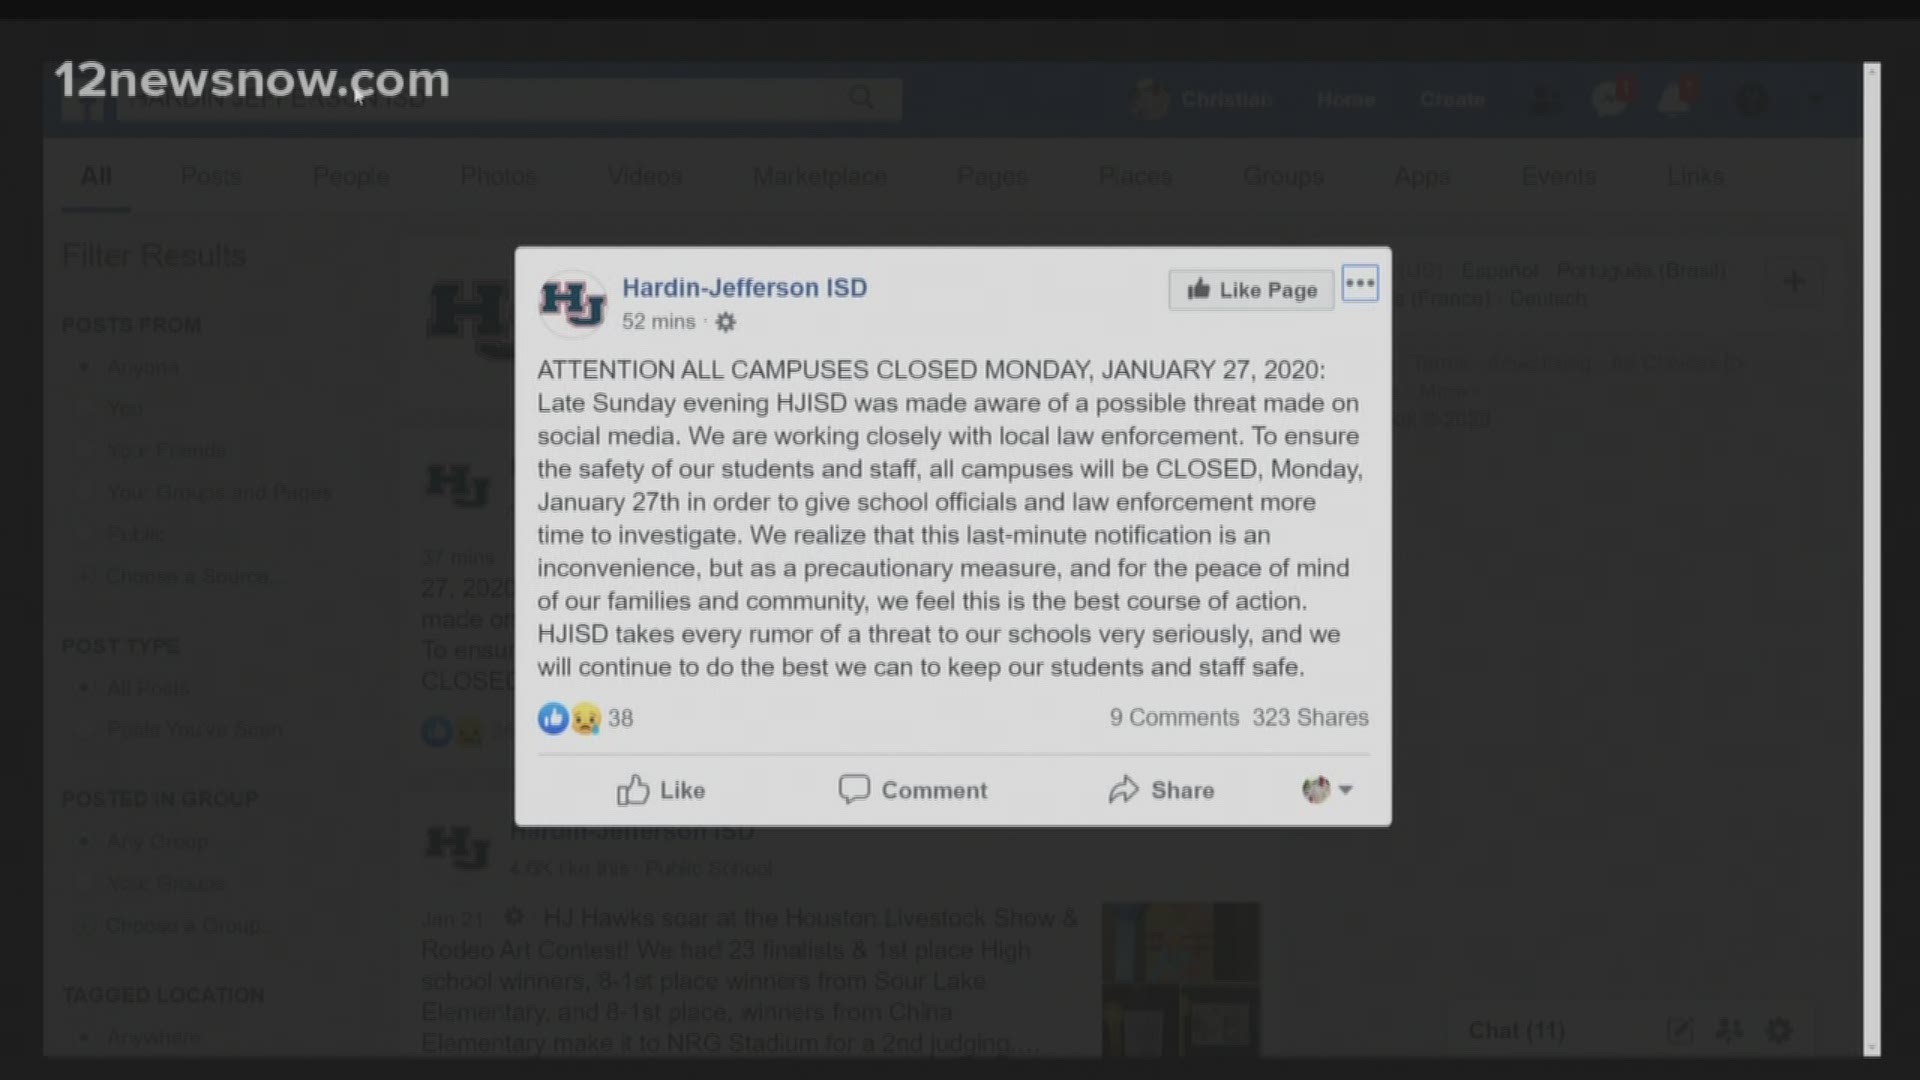 Both Hardin Jefferson ISD and Evadale ISD cancelled classes Monday due to a threat. Evadale ISD's superintendent said this is due to "unforseen circumstances."